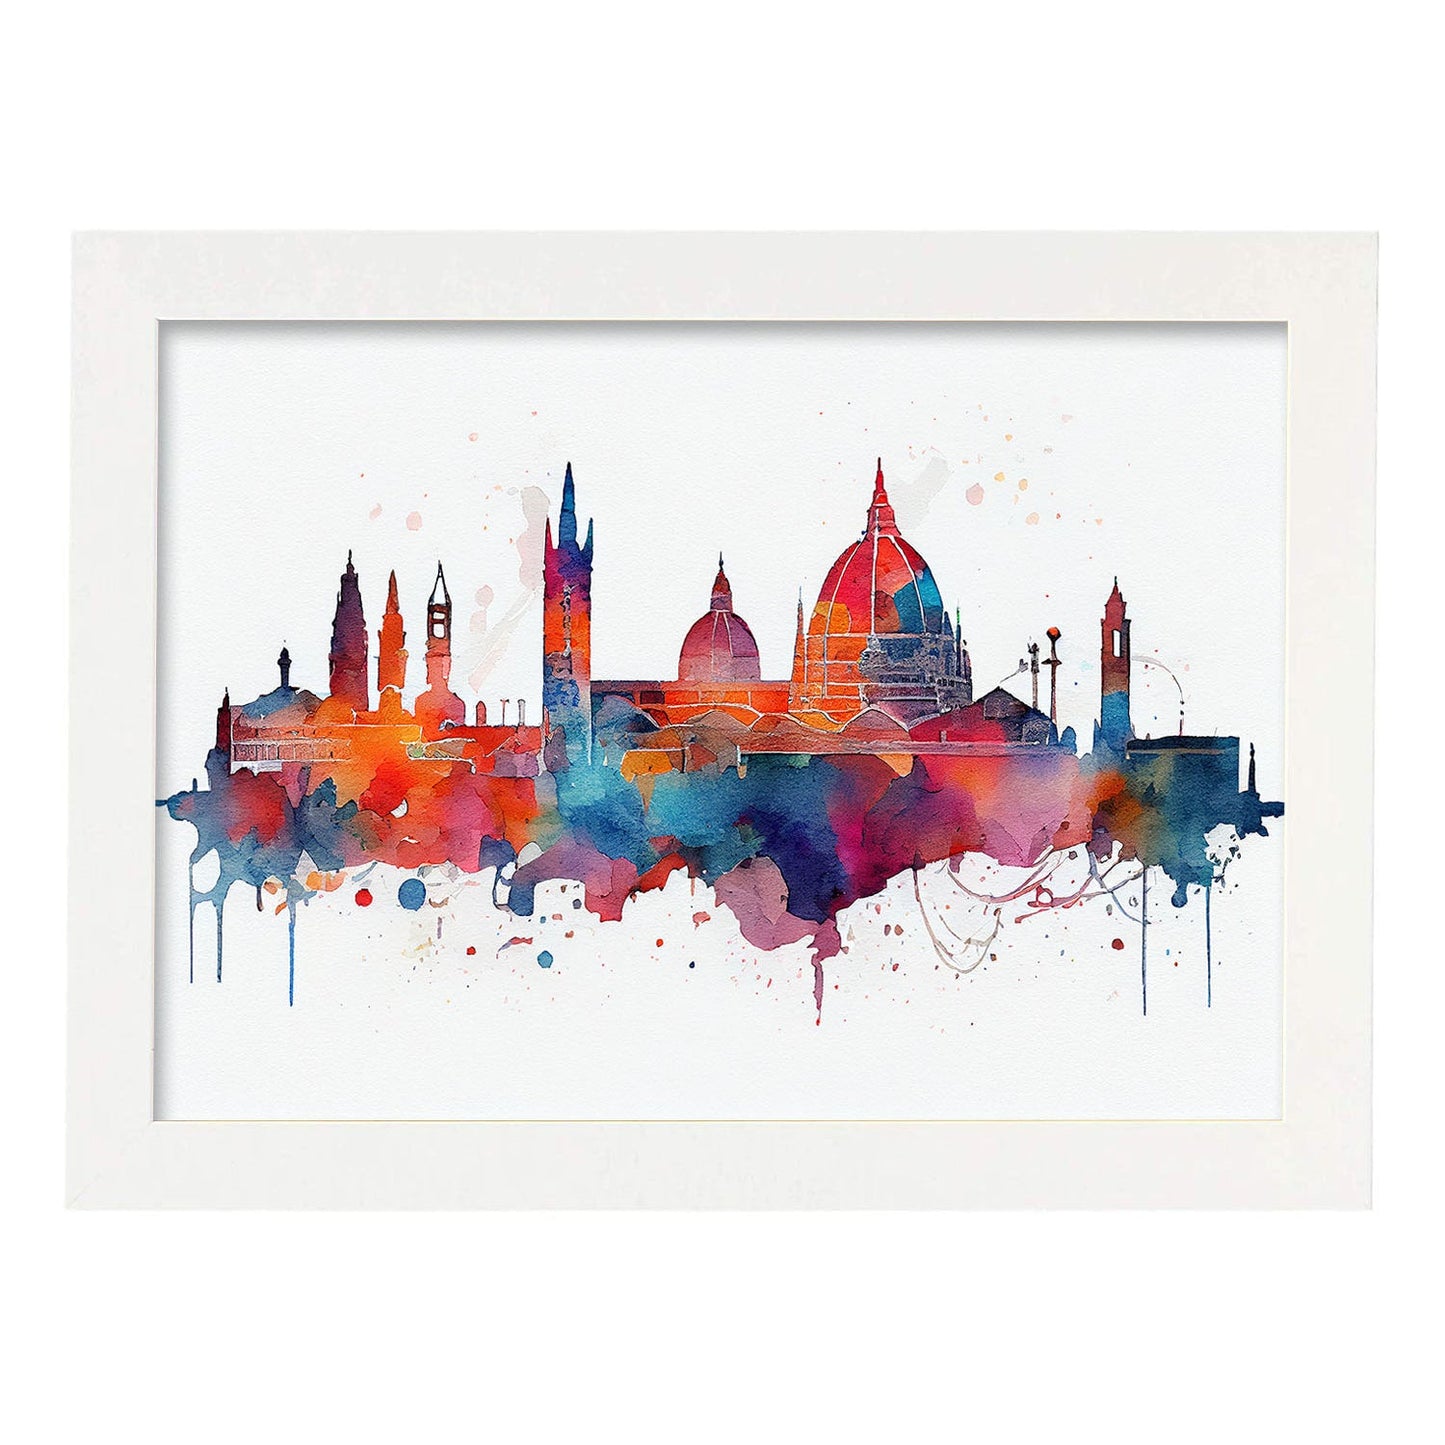 Nacnic watercolor of a skyline of the city of Florence_2. Aesthetic Wall Art Prints for Bedroom or Living Room Design.-Artwork-Nacnic-A4-Marco Blanco-Nacnic Estudio SL